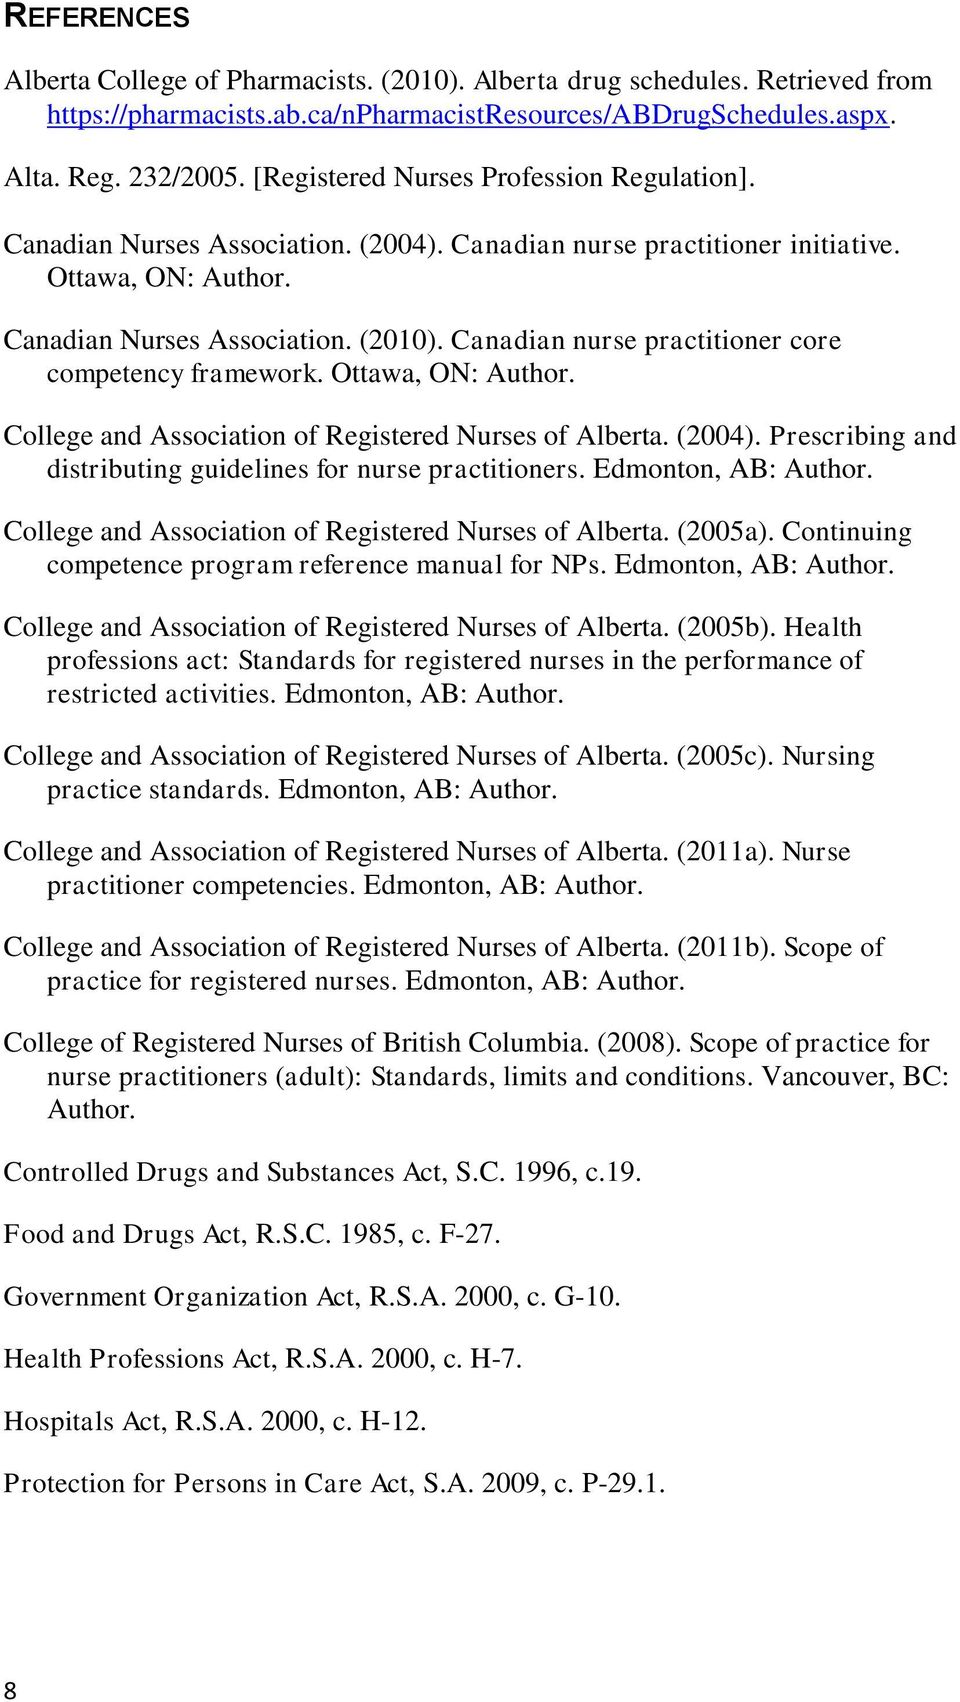 Canadian nurse practitioner core competency framework. Ottawa, ON: Author. College and Association of Registered Nurses of Alberta. (2004).